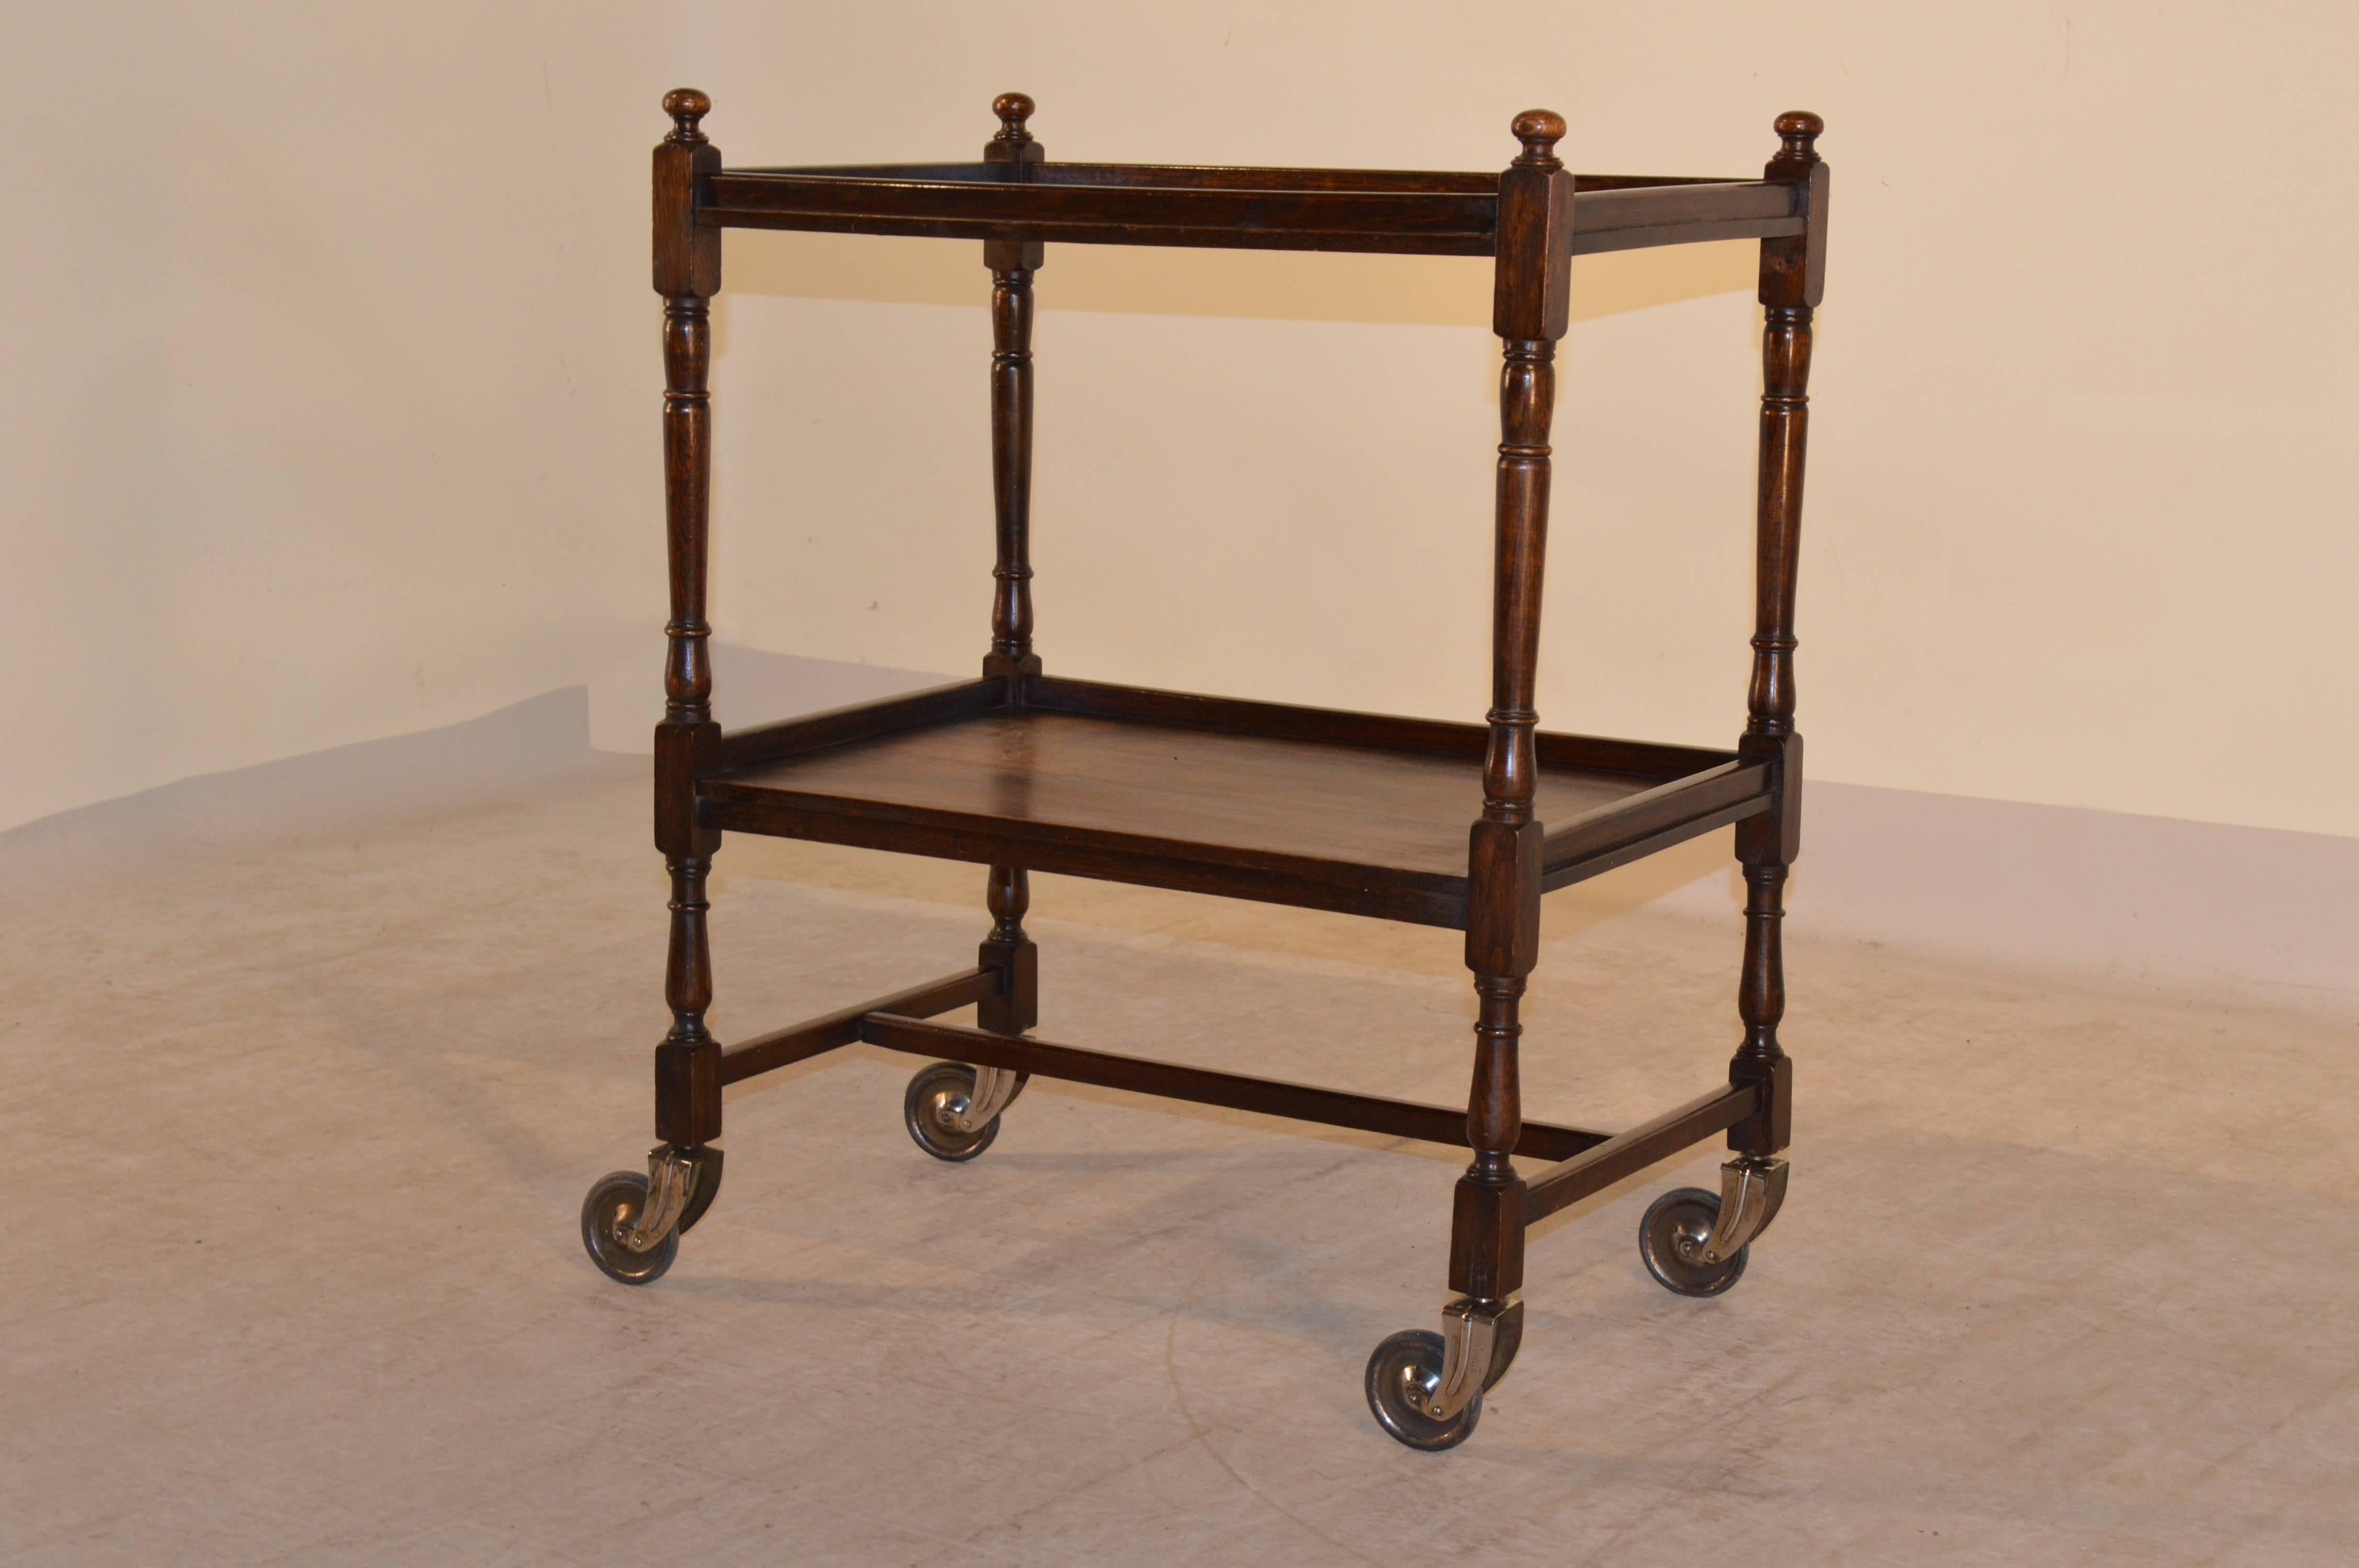 English oak drinks cart with two shelves, hand-turned legs joined by a cross stretcher and raised on casters, circa 1900.